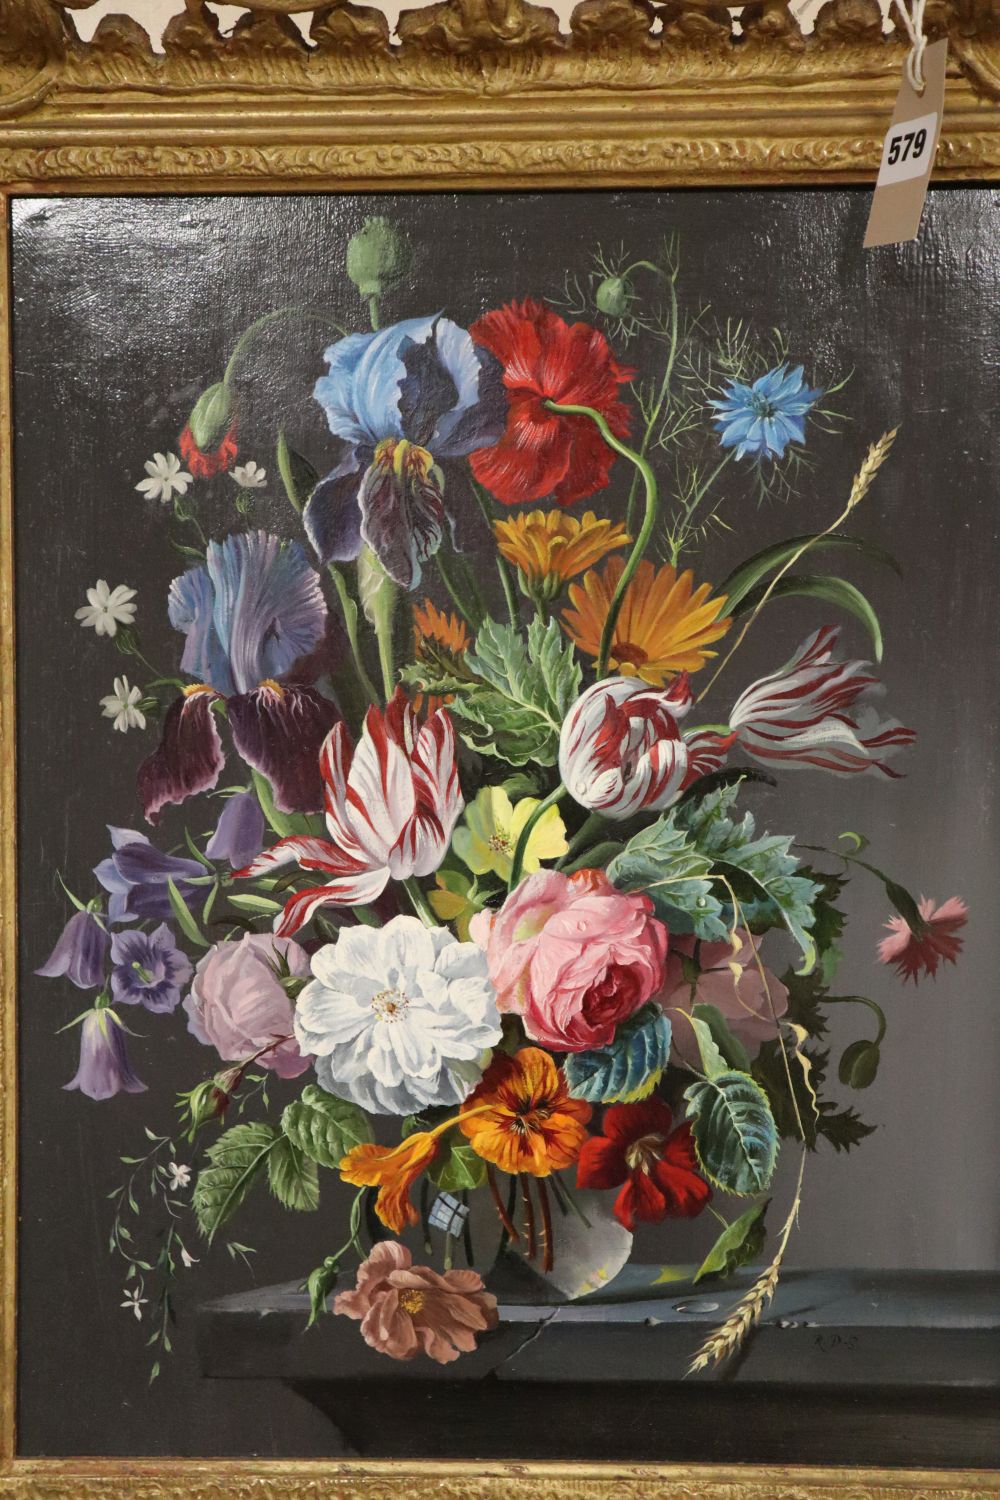 Robert Dumont-Smith (1908-199), Flower Piece, dated 1974, oil on canvas, carved giltwood frame, 50 x 40cm